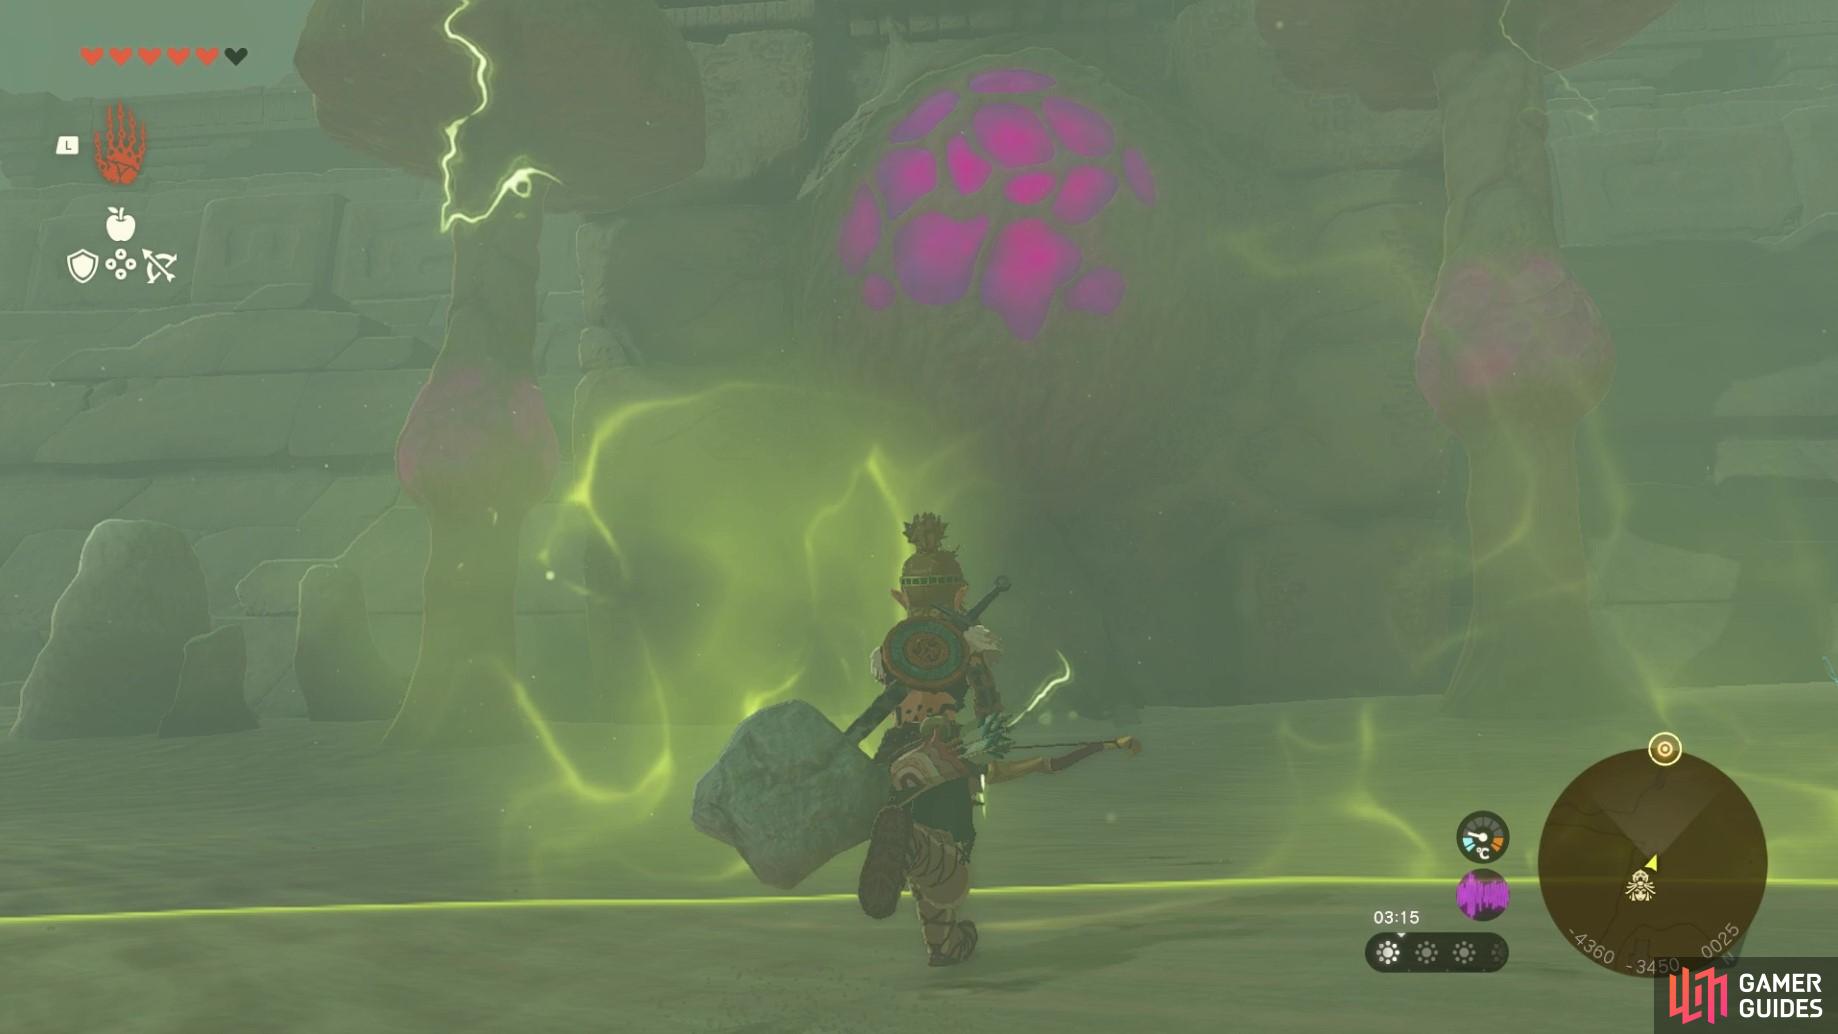 Shoot the glowing pink part of the mushroom to start the lightning temple!